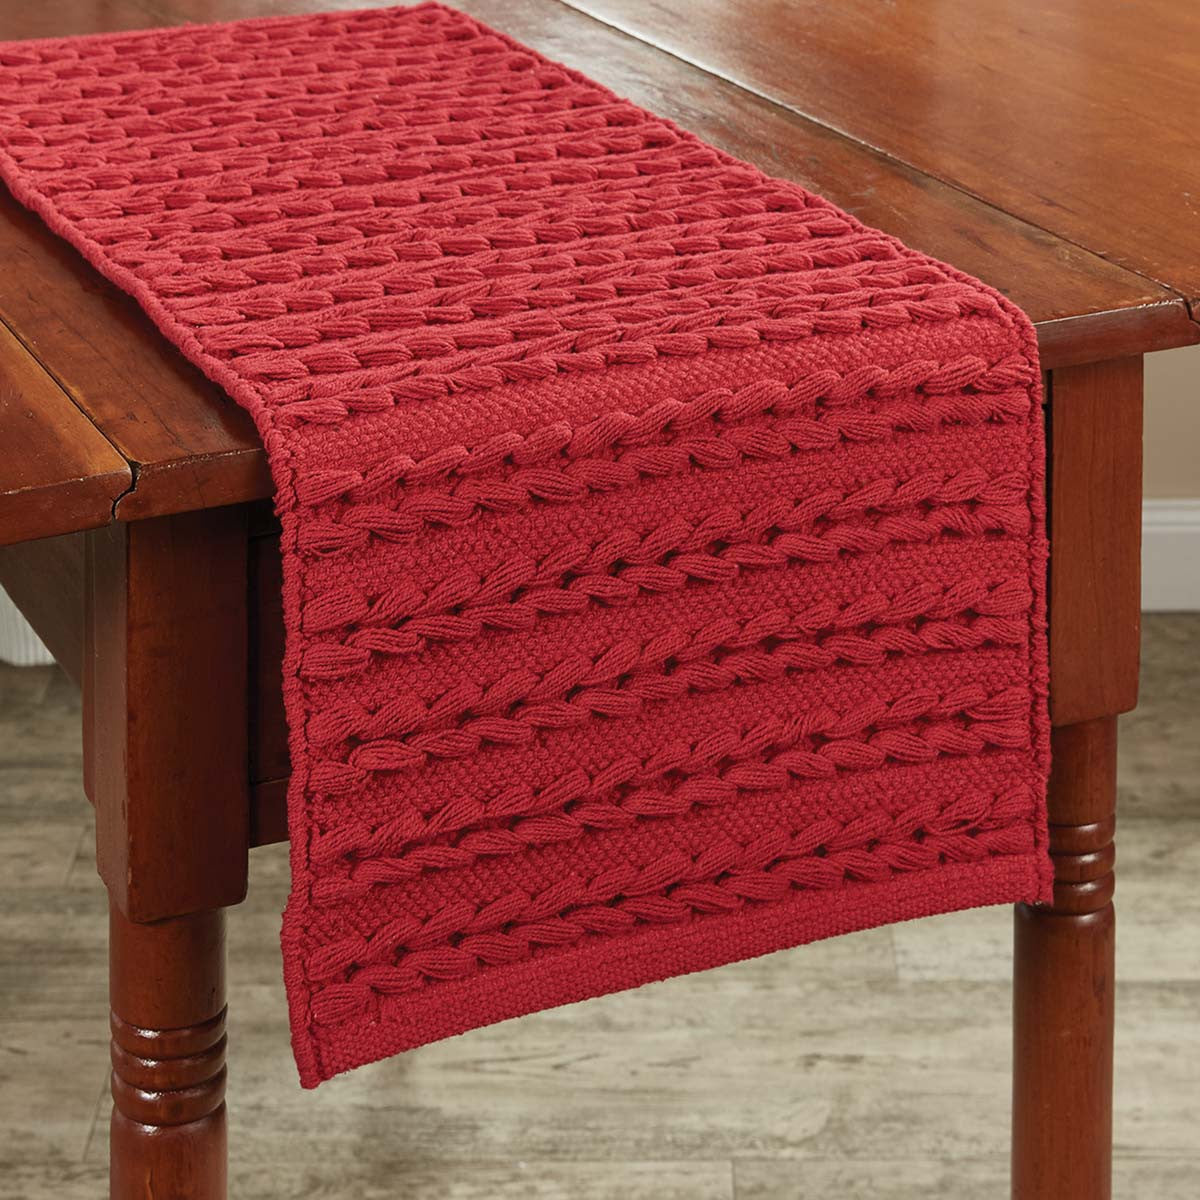 Winter Magic Table Runners - Scarf Red 36"L Park Designs